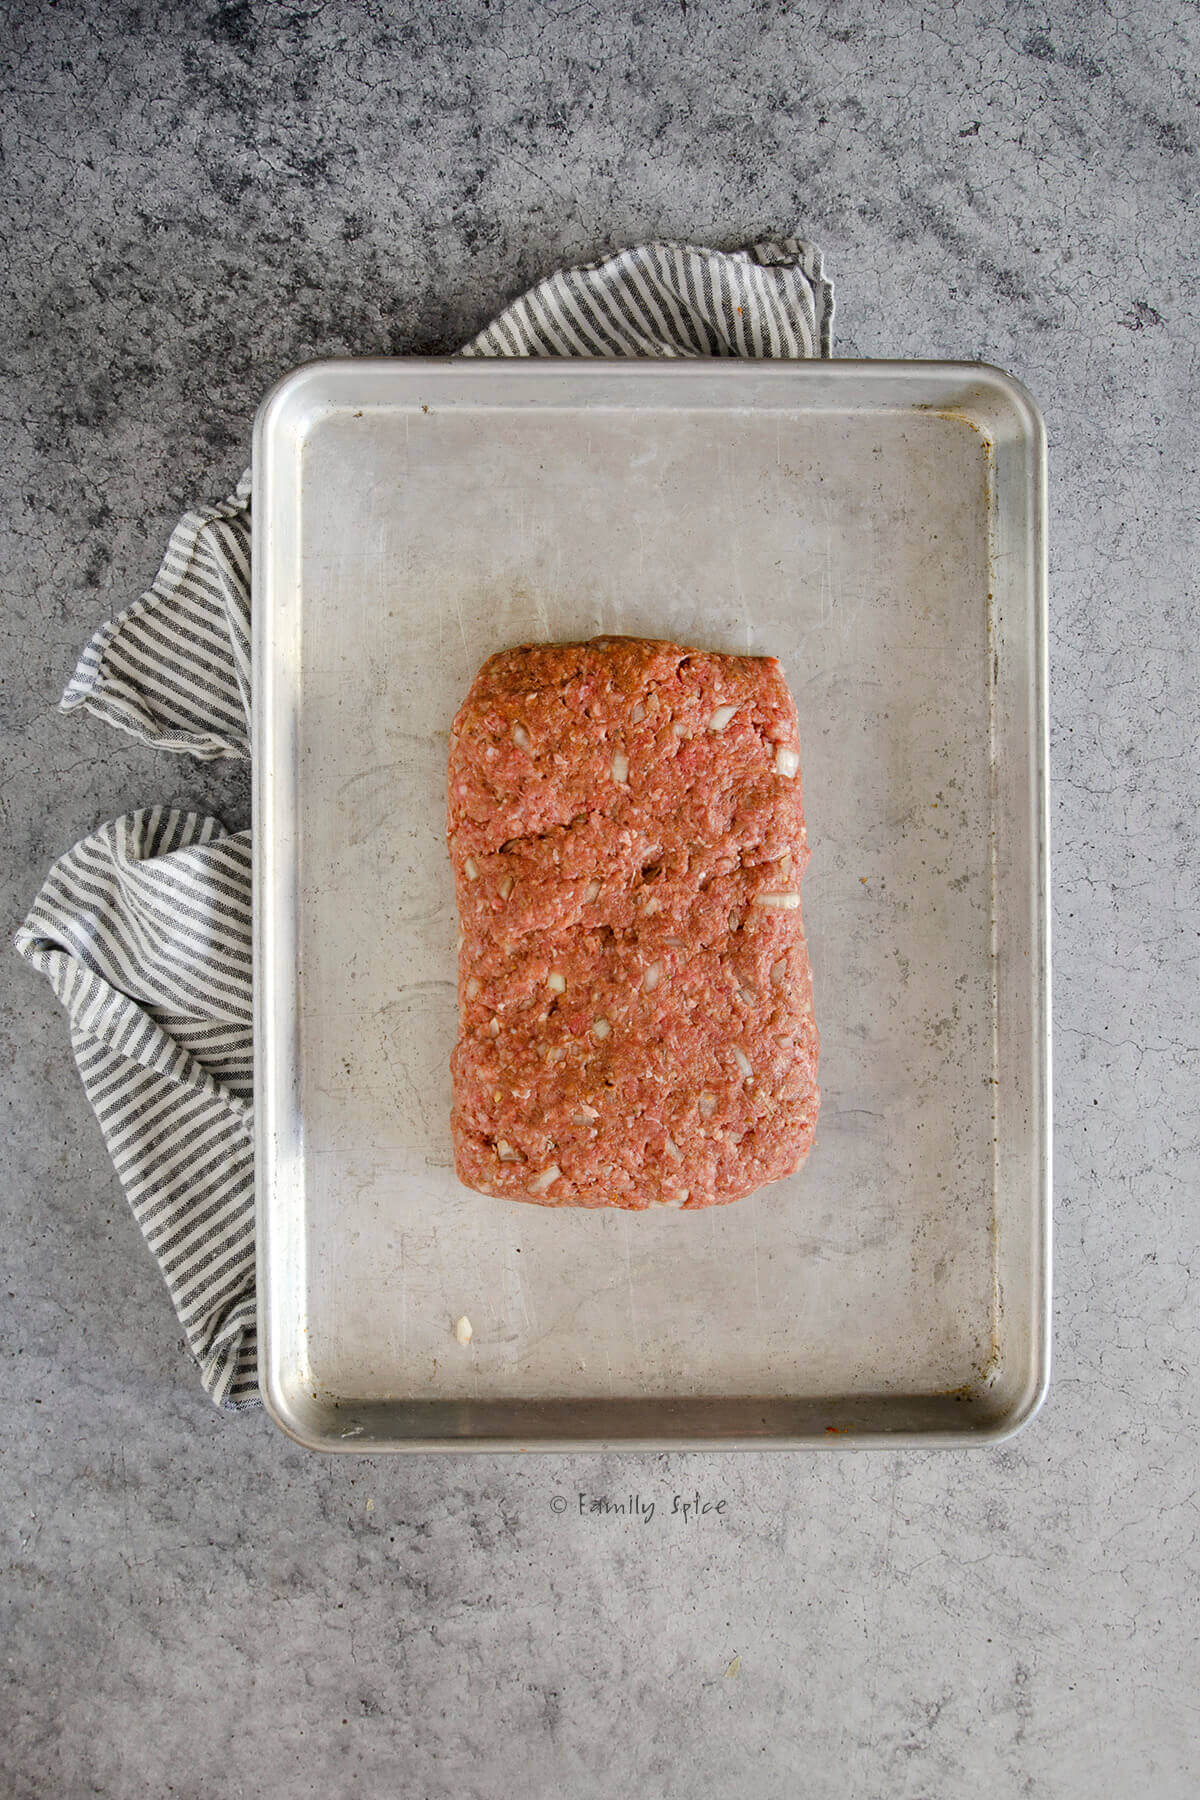 Meatloaf mixture formed into a rectangle on a baking sheet